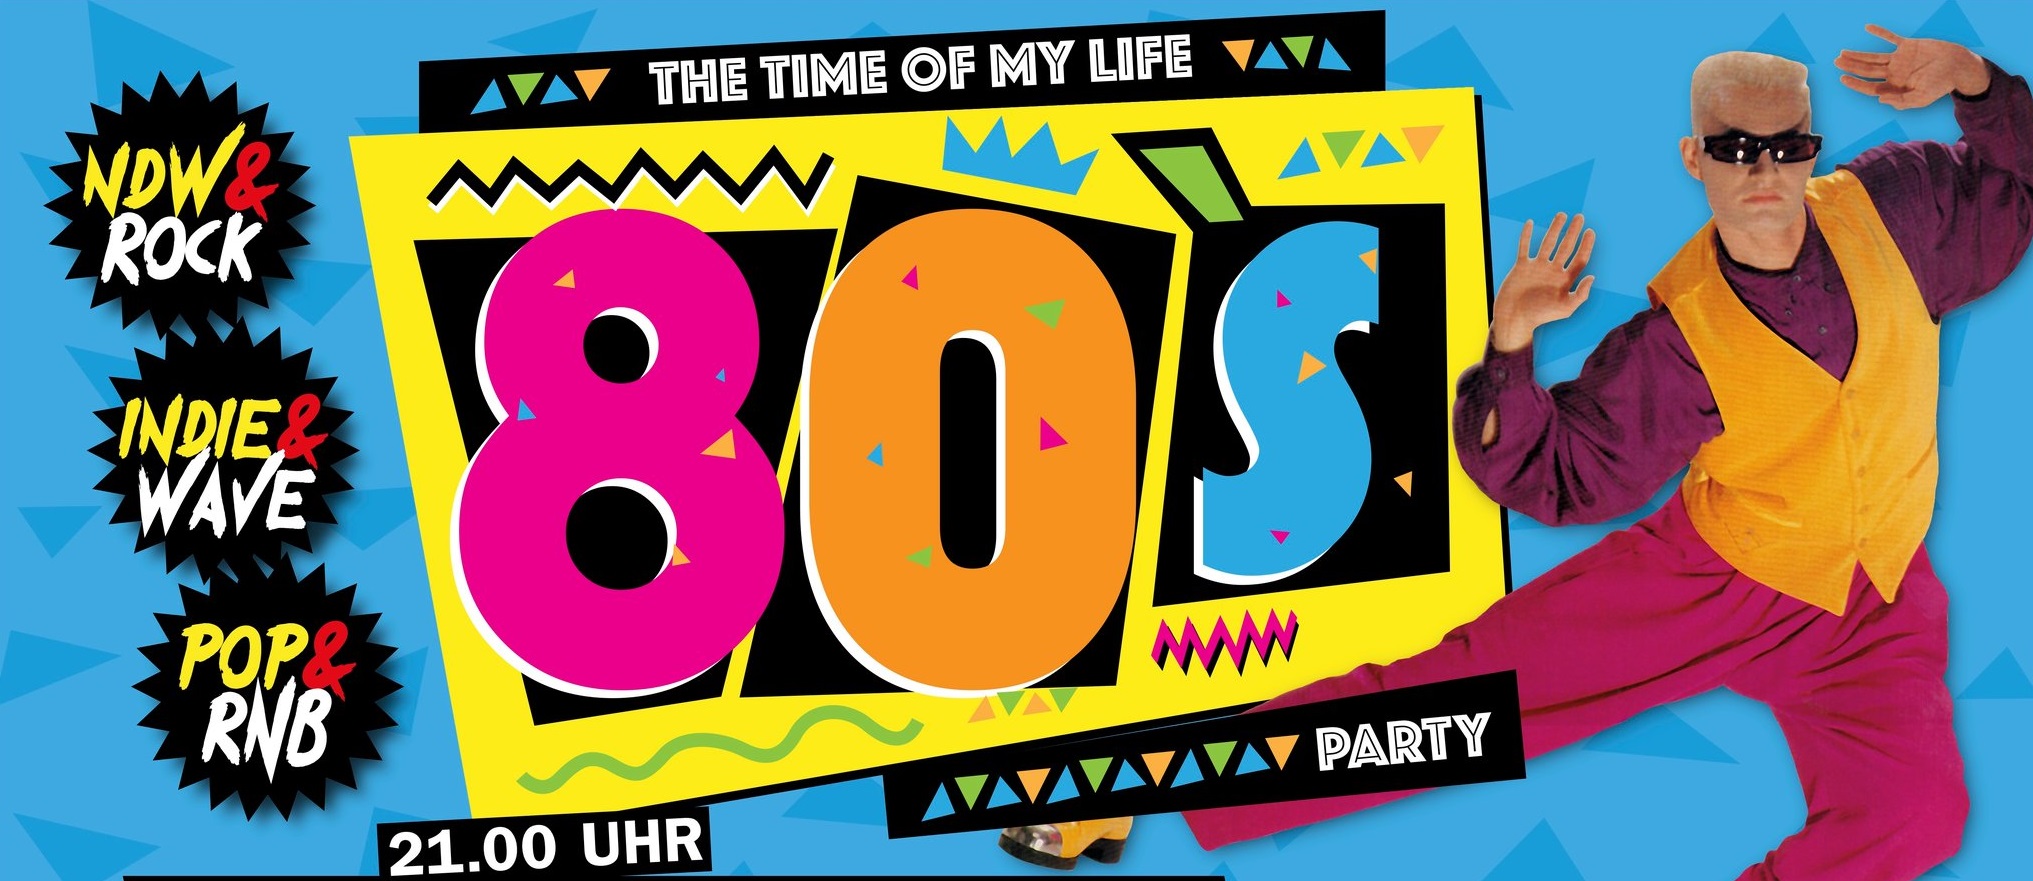 The Time of my Life - die große 80er Jahre Party